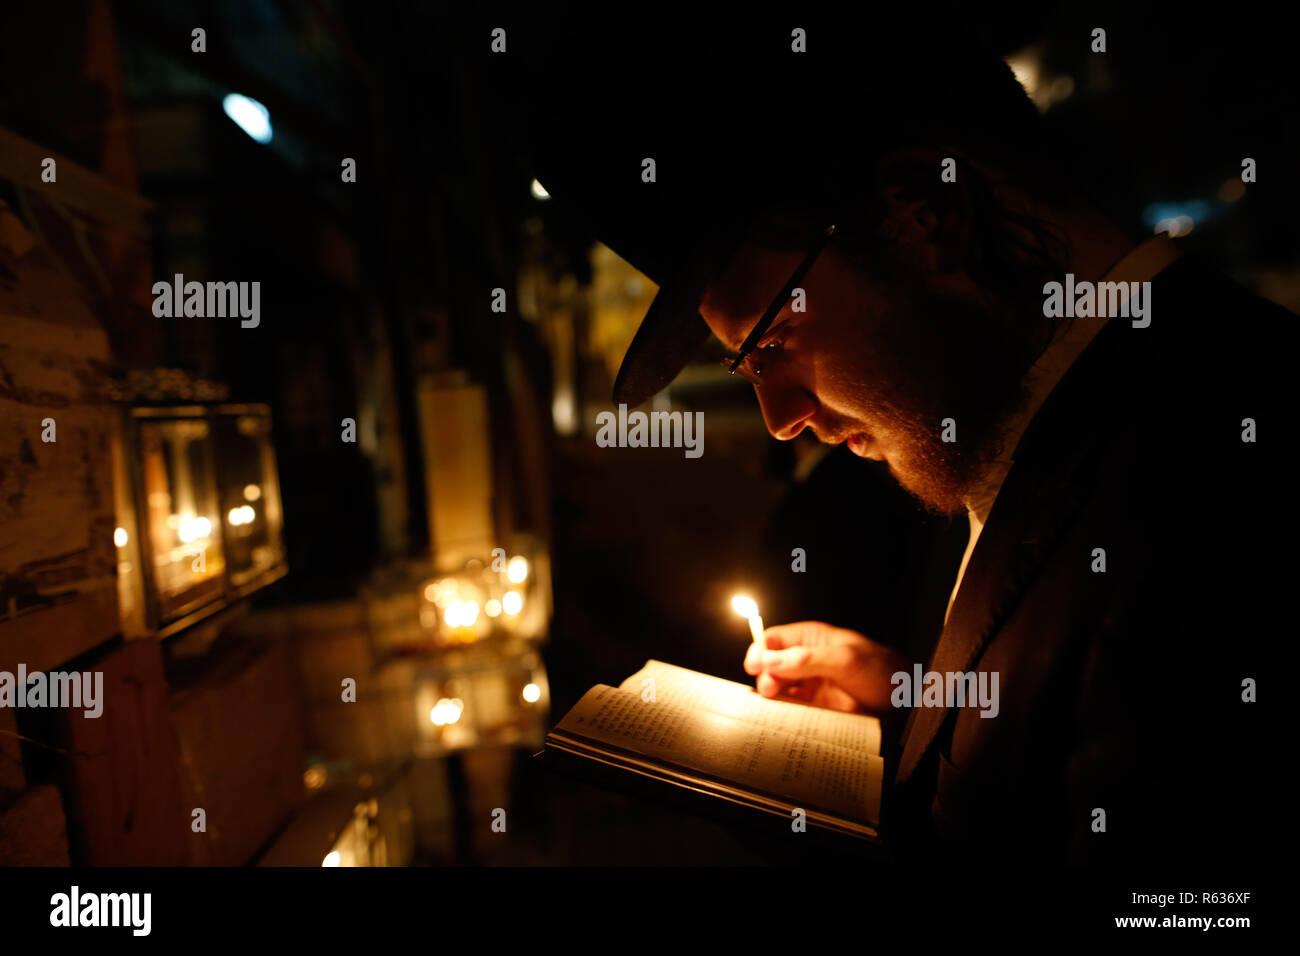 Jerusalem. 3rd Dec, 2018. An ultra-Orthodox Jewish man holds a candle during Hanukkah in Mea Shearim neighborhood in Jerusalem, on Dec. 3, 2018. Hanukkah, also known as the Festival of Lights and Feast of Dedication, is an eight-day Jewish holiday commemorating the rededication of the Holy Temple (the Second Temple) in Jerusalem at the time of the Maccabean Revolt against the Seleucid Empire of the 2nd Century B.C. Credit: Gil Cohen Magen/Xinhua/Alamy Live News Stock Photo